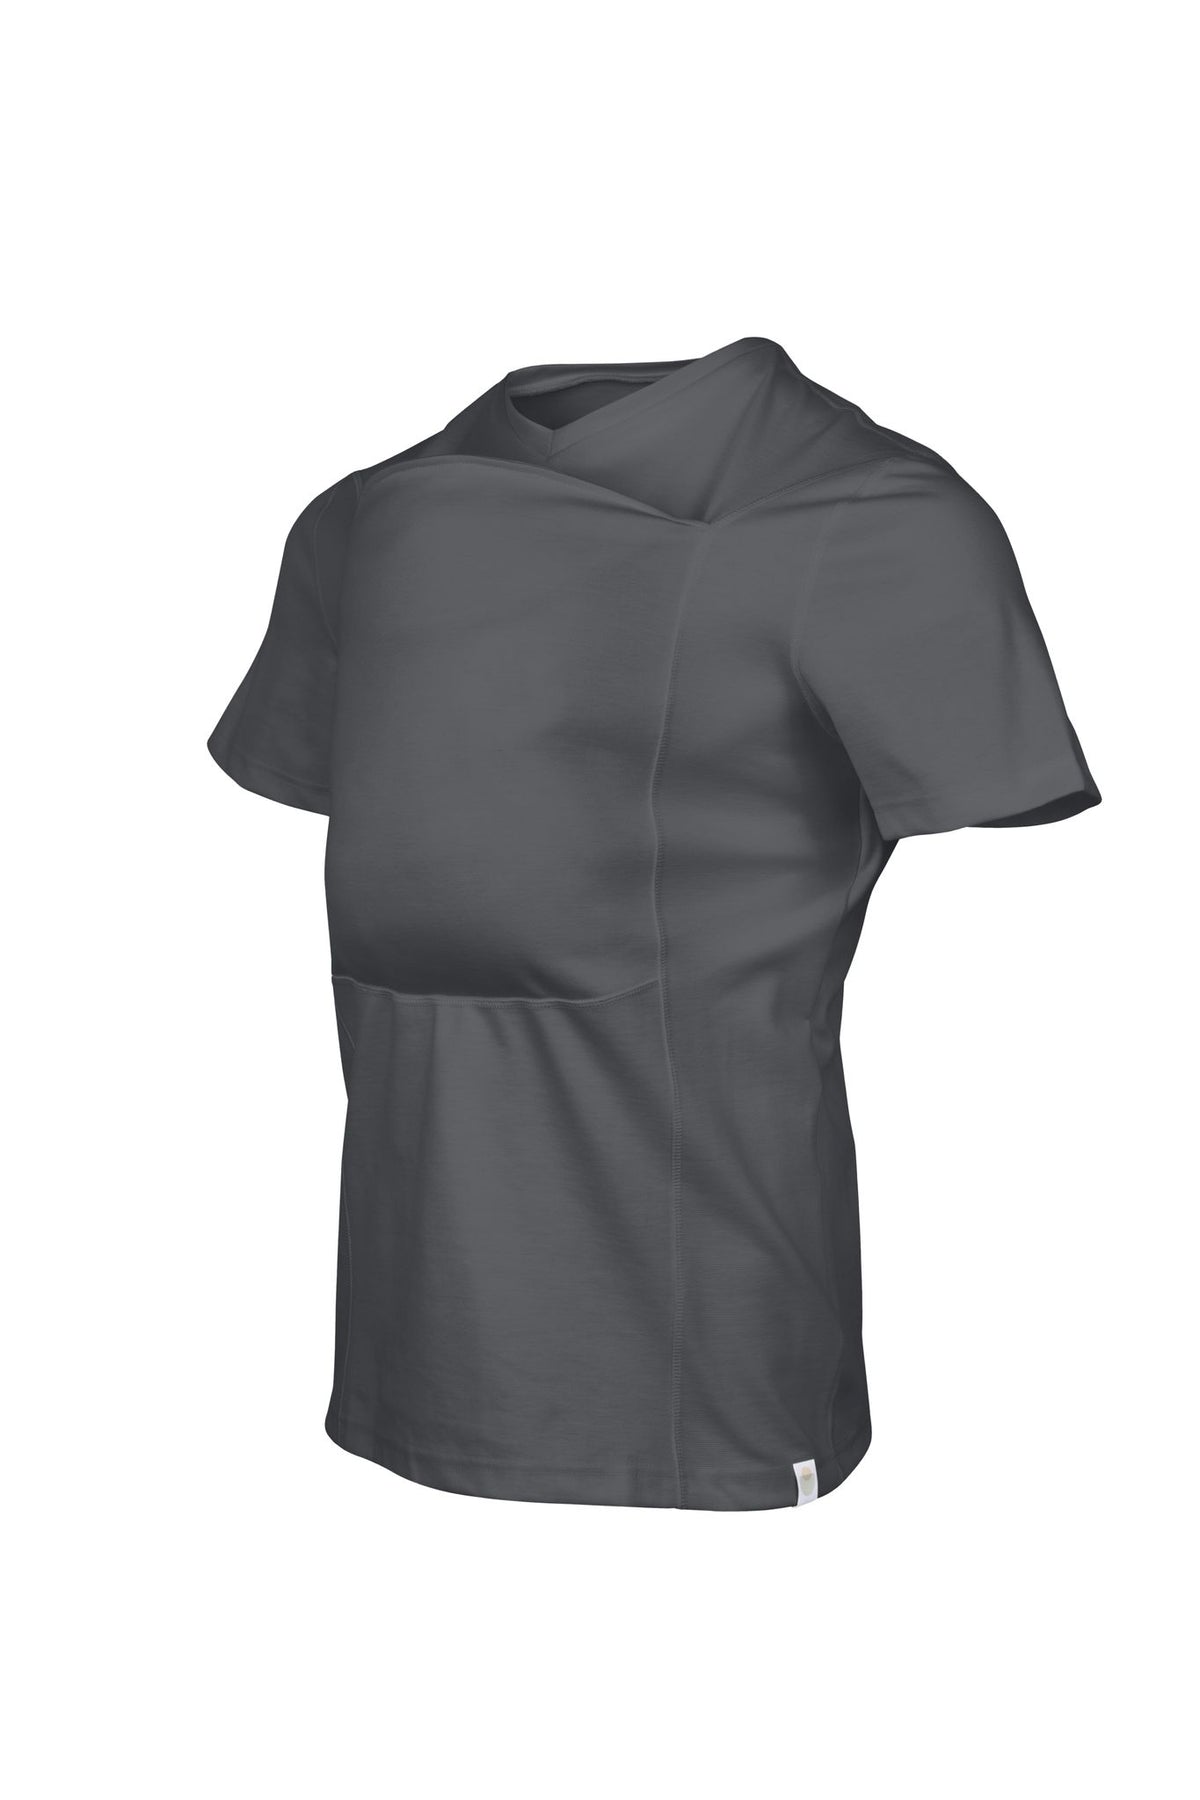 Short sleeve v-neck Dad Shirt with a front pouch for wearing a newborn in gray.